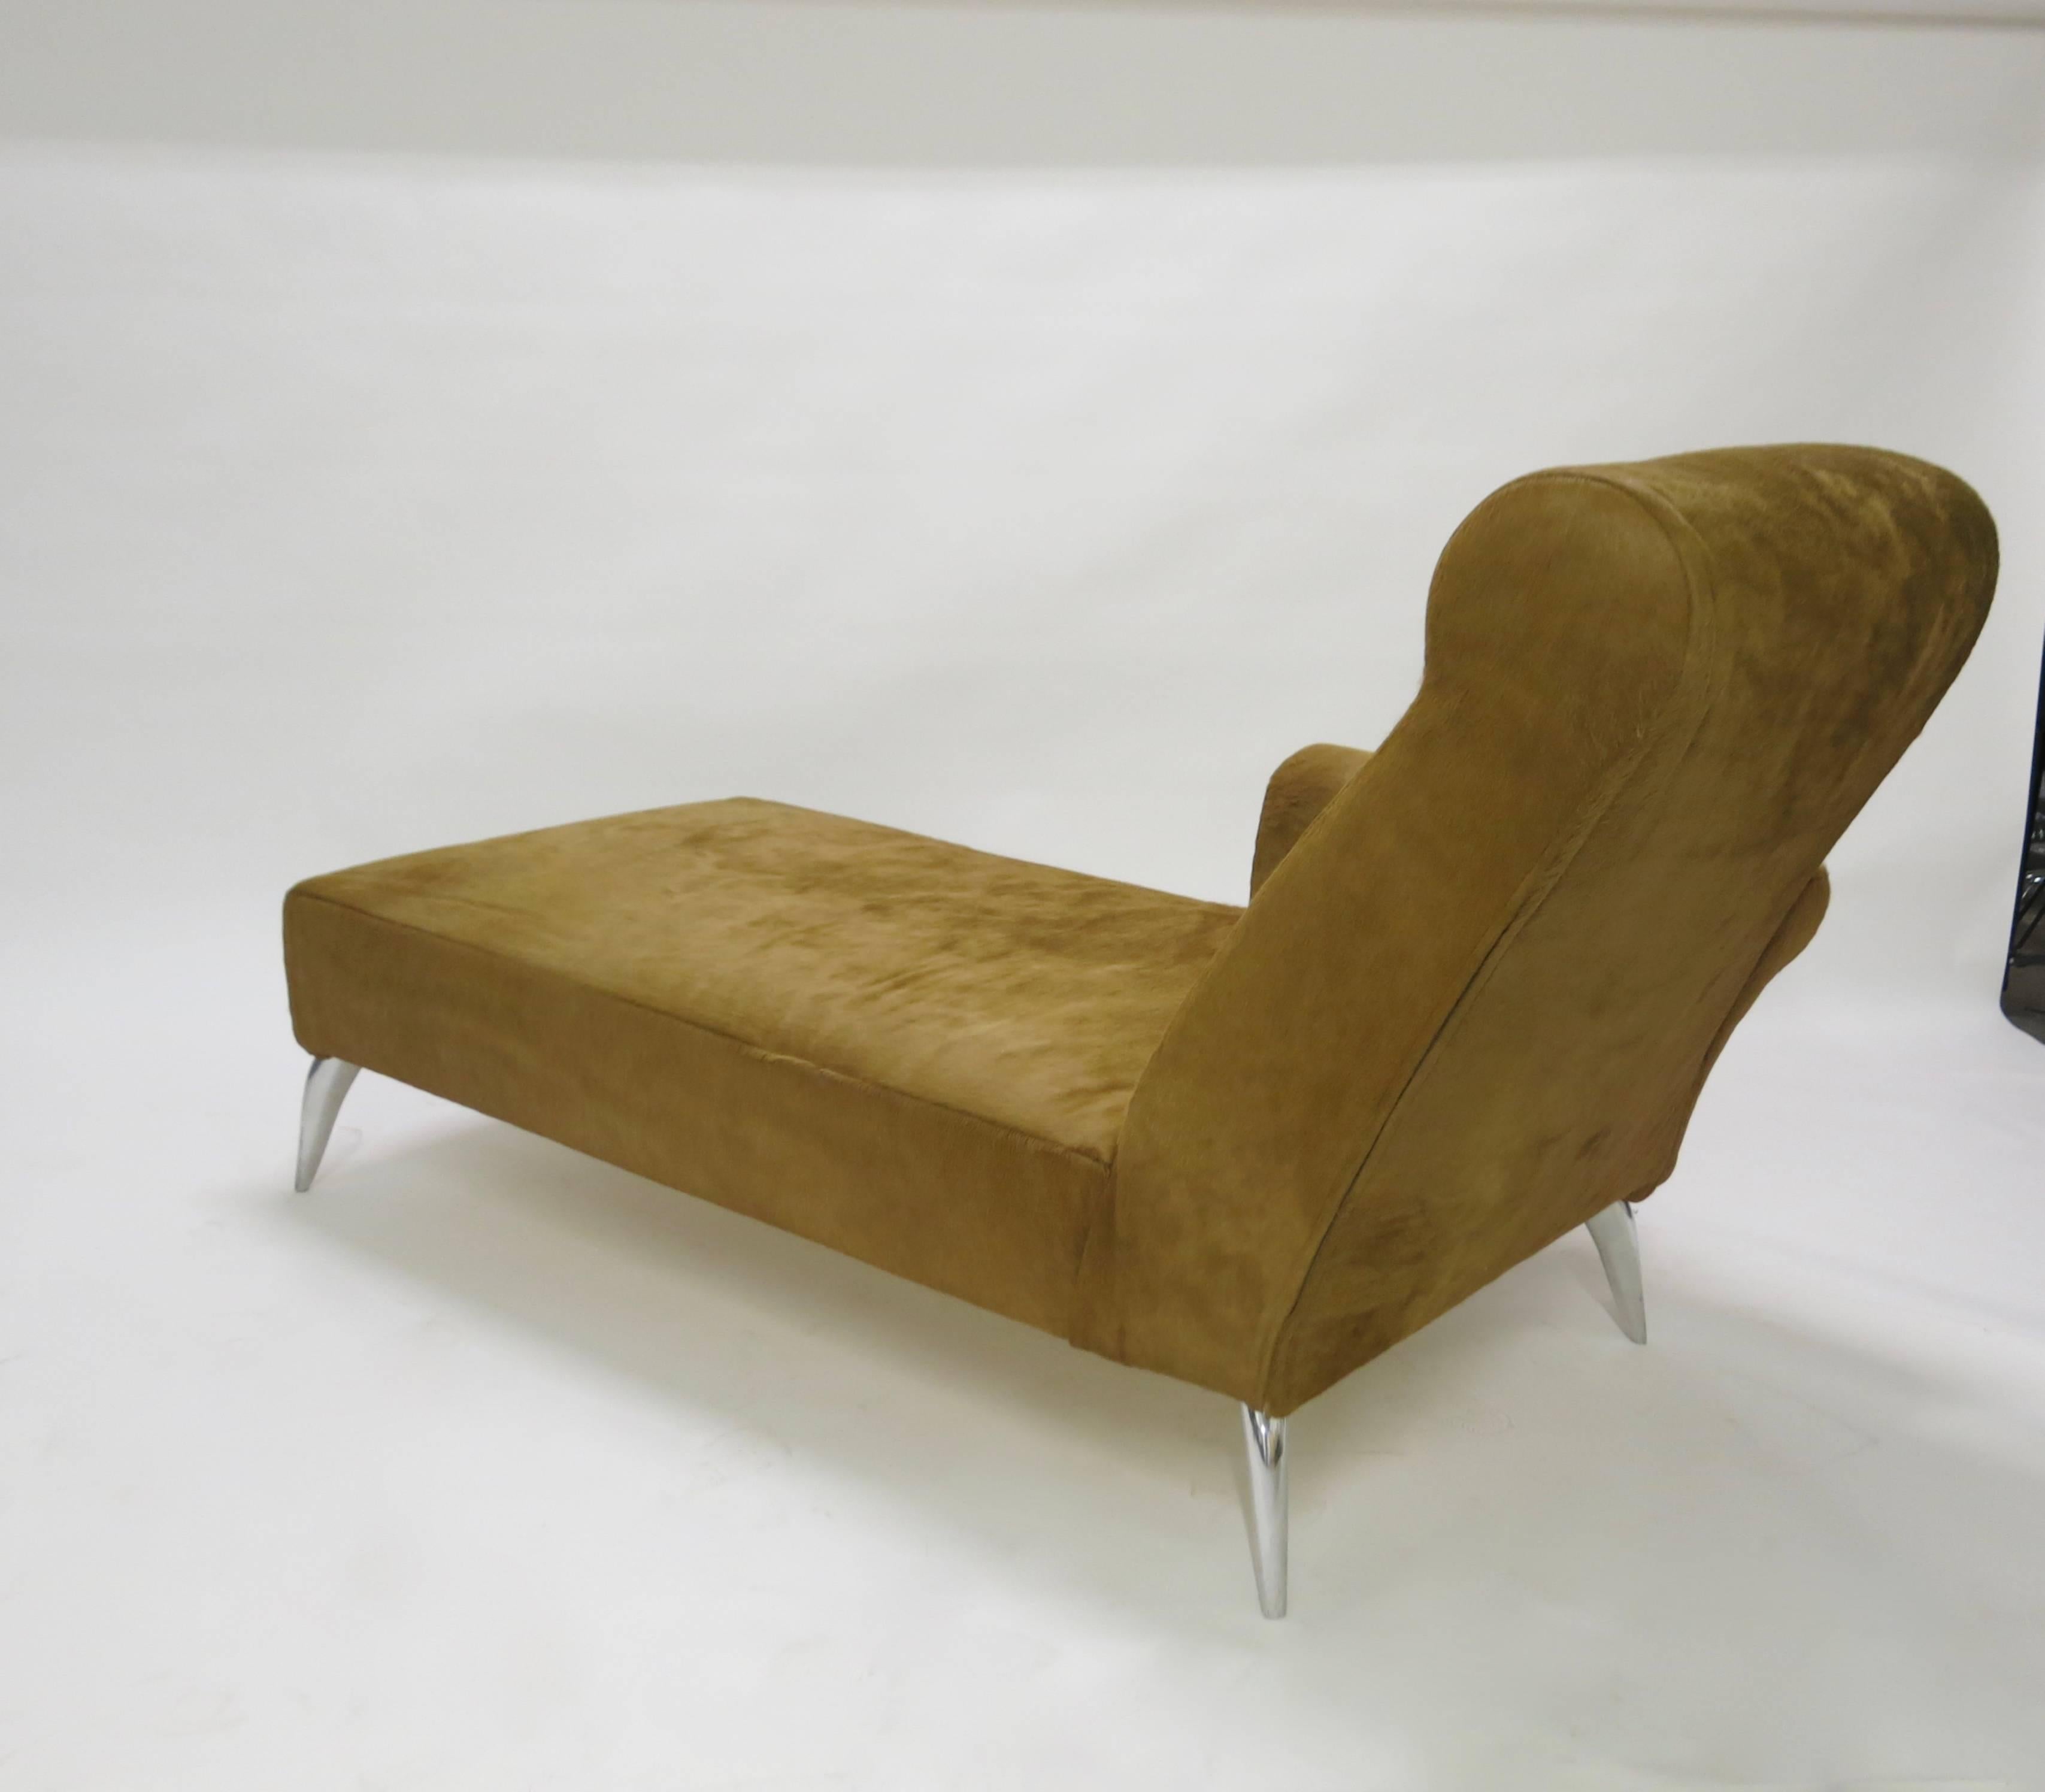 Italian Chaise Longue in Cowhide by Philippe Starck for Driade Aleph, circa 1990, Italy